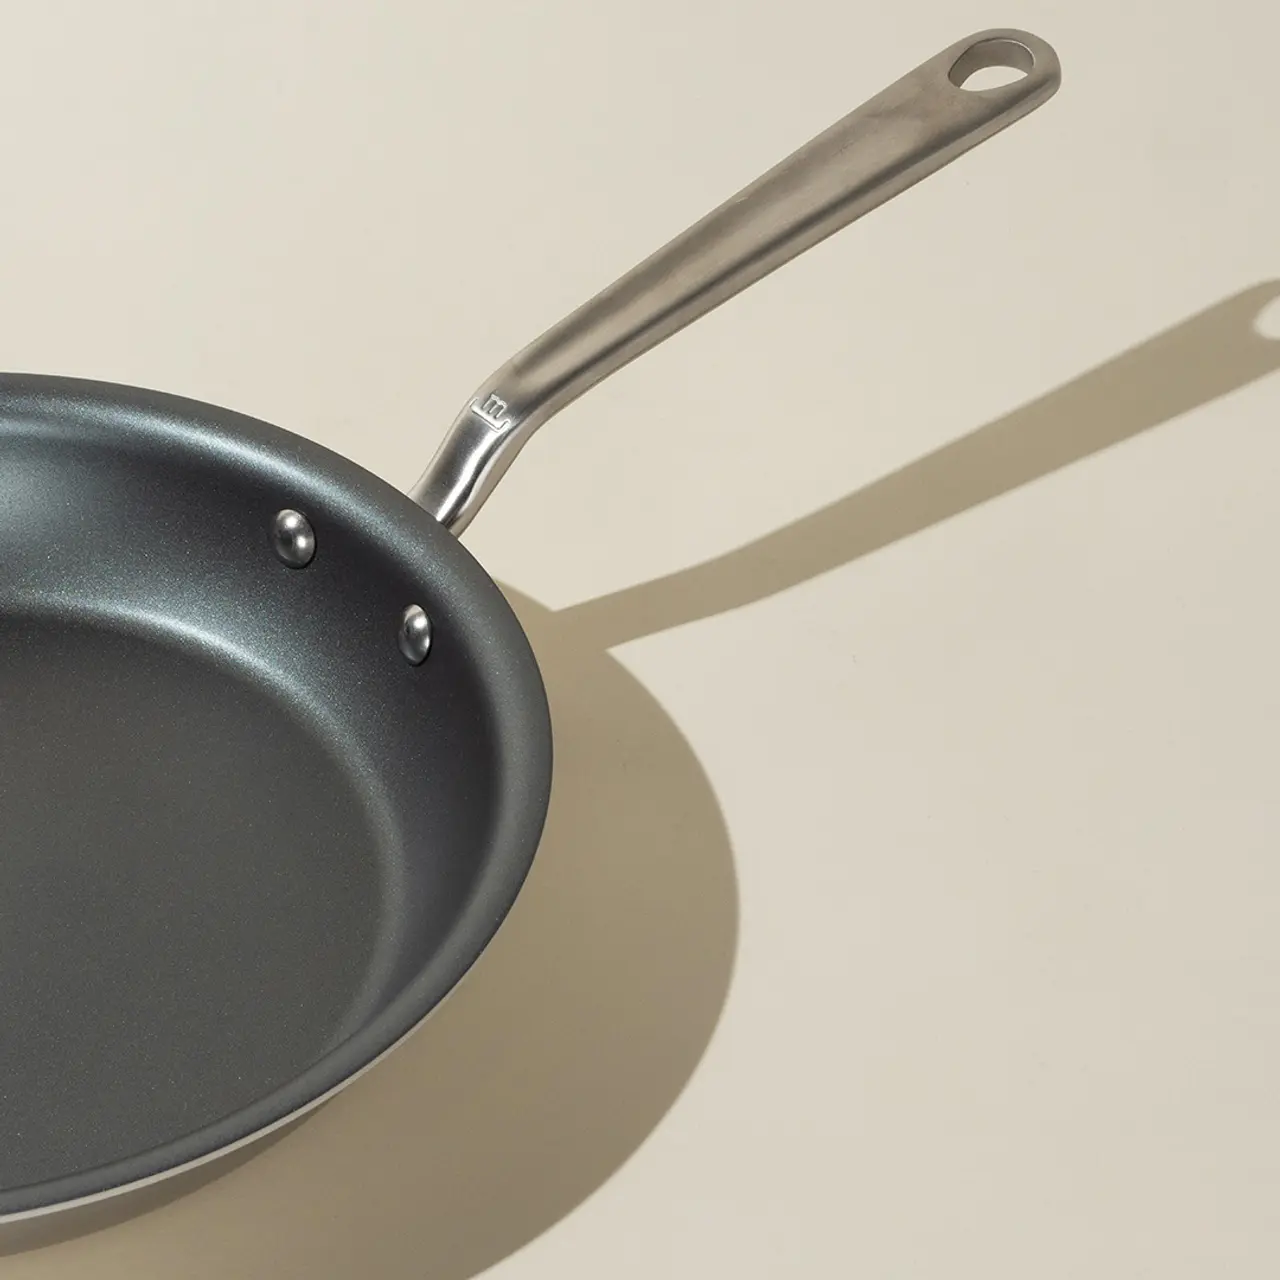 A non-stick frying pan with a stainless steel handle casts a shadow on a light surface.